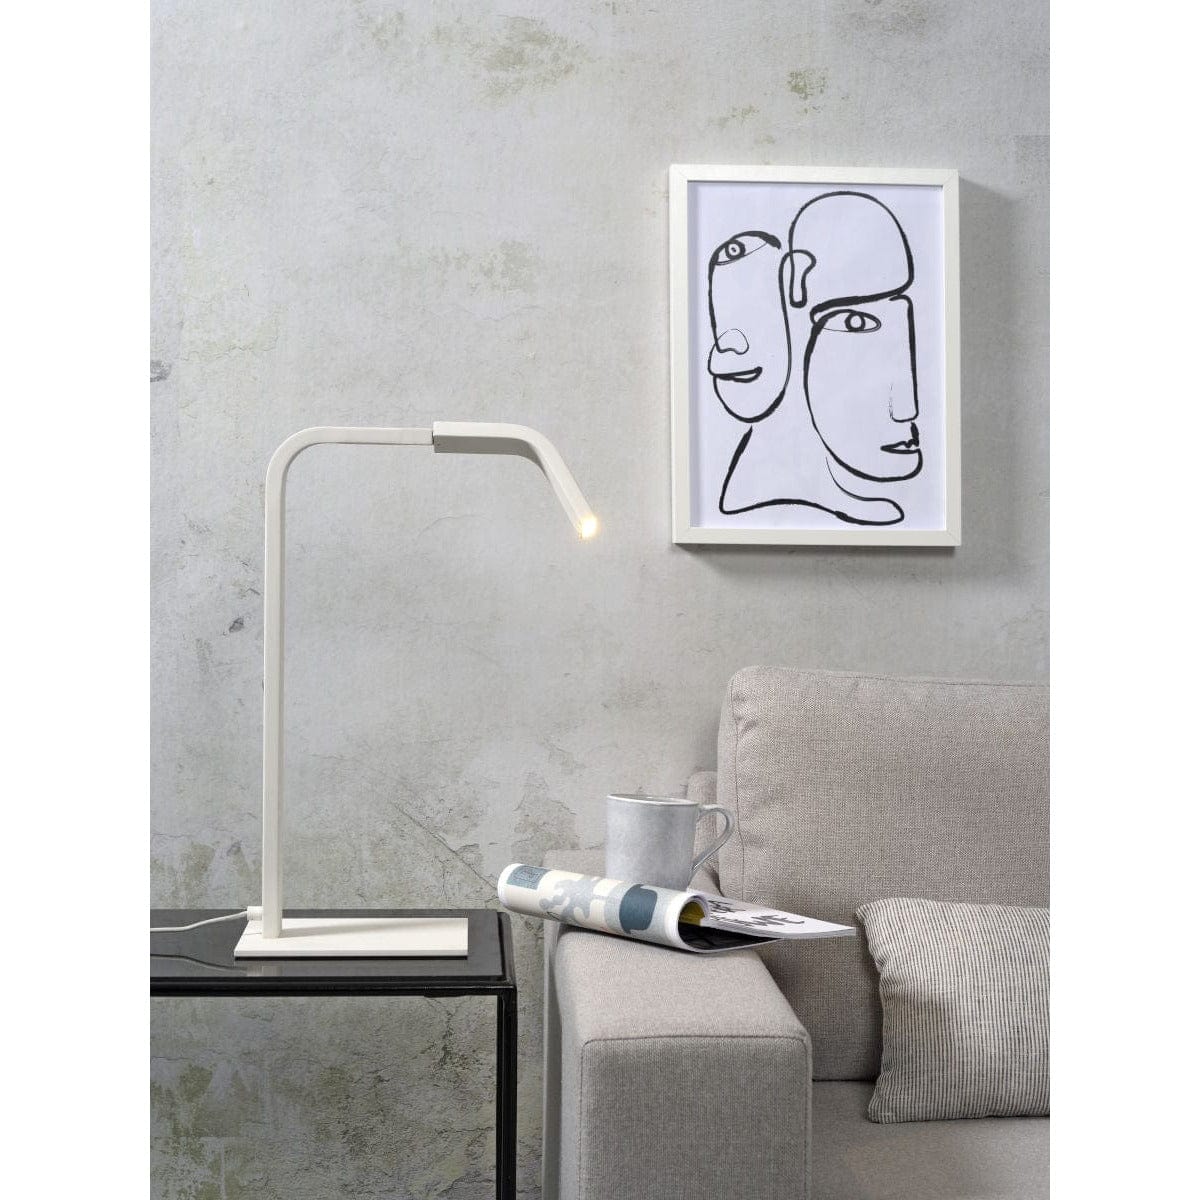 It's About RoMi Table Lamp Zurich Table Lamp, Black or White